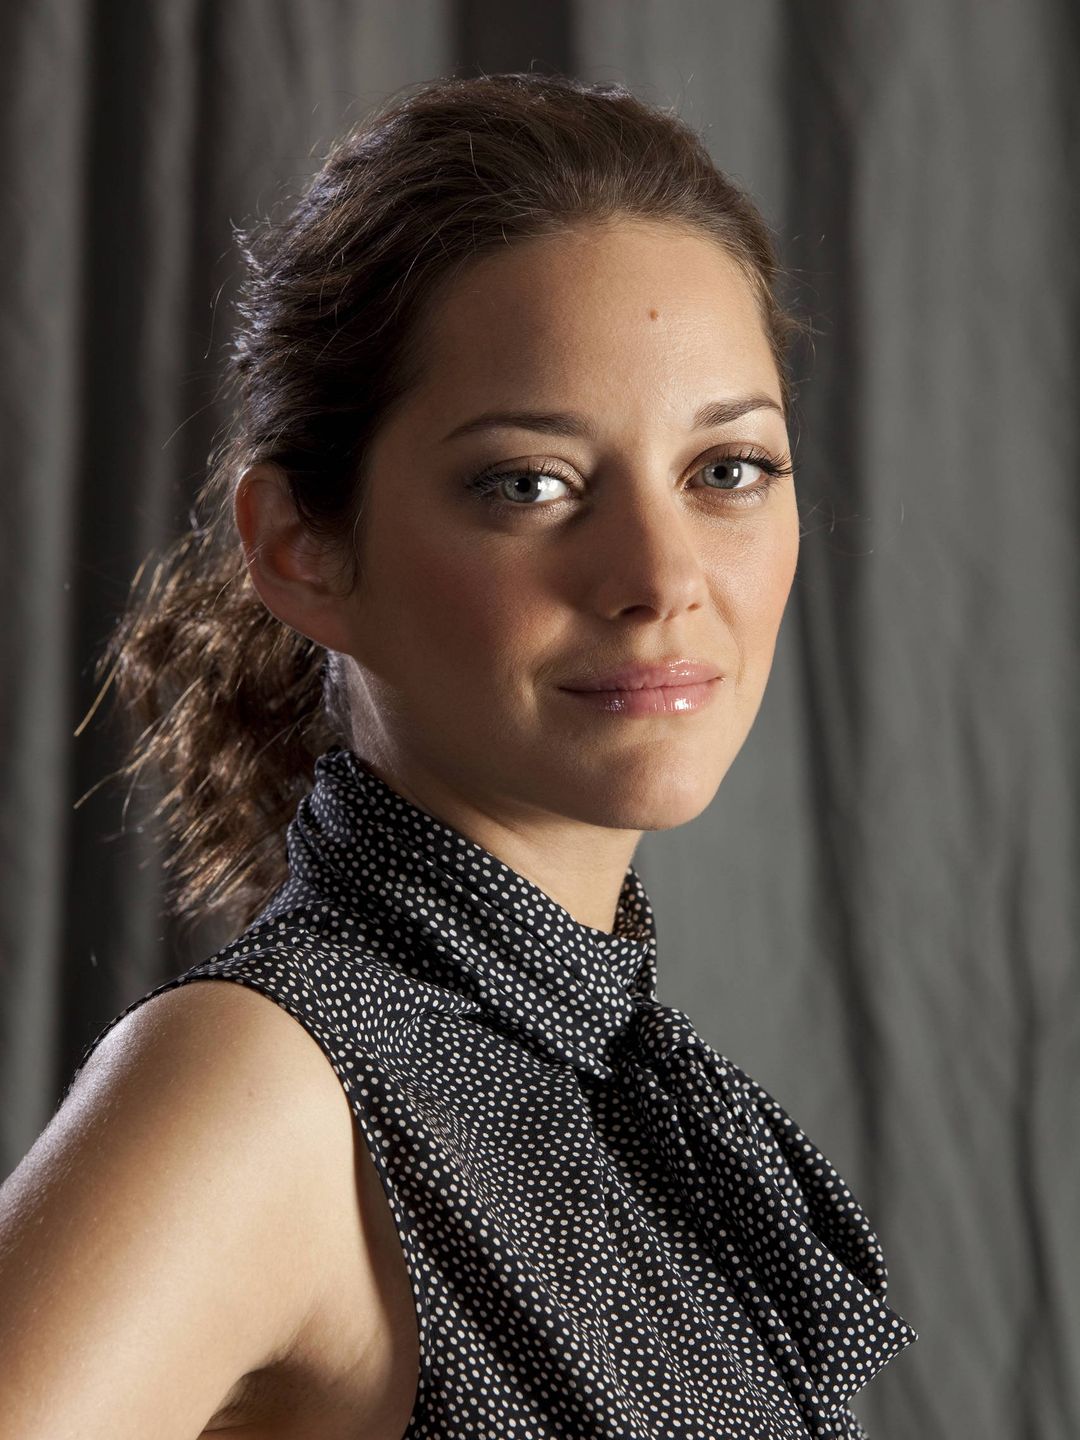 Marion Cotillard who is she